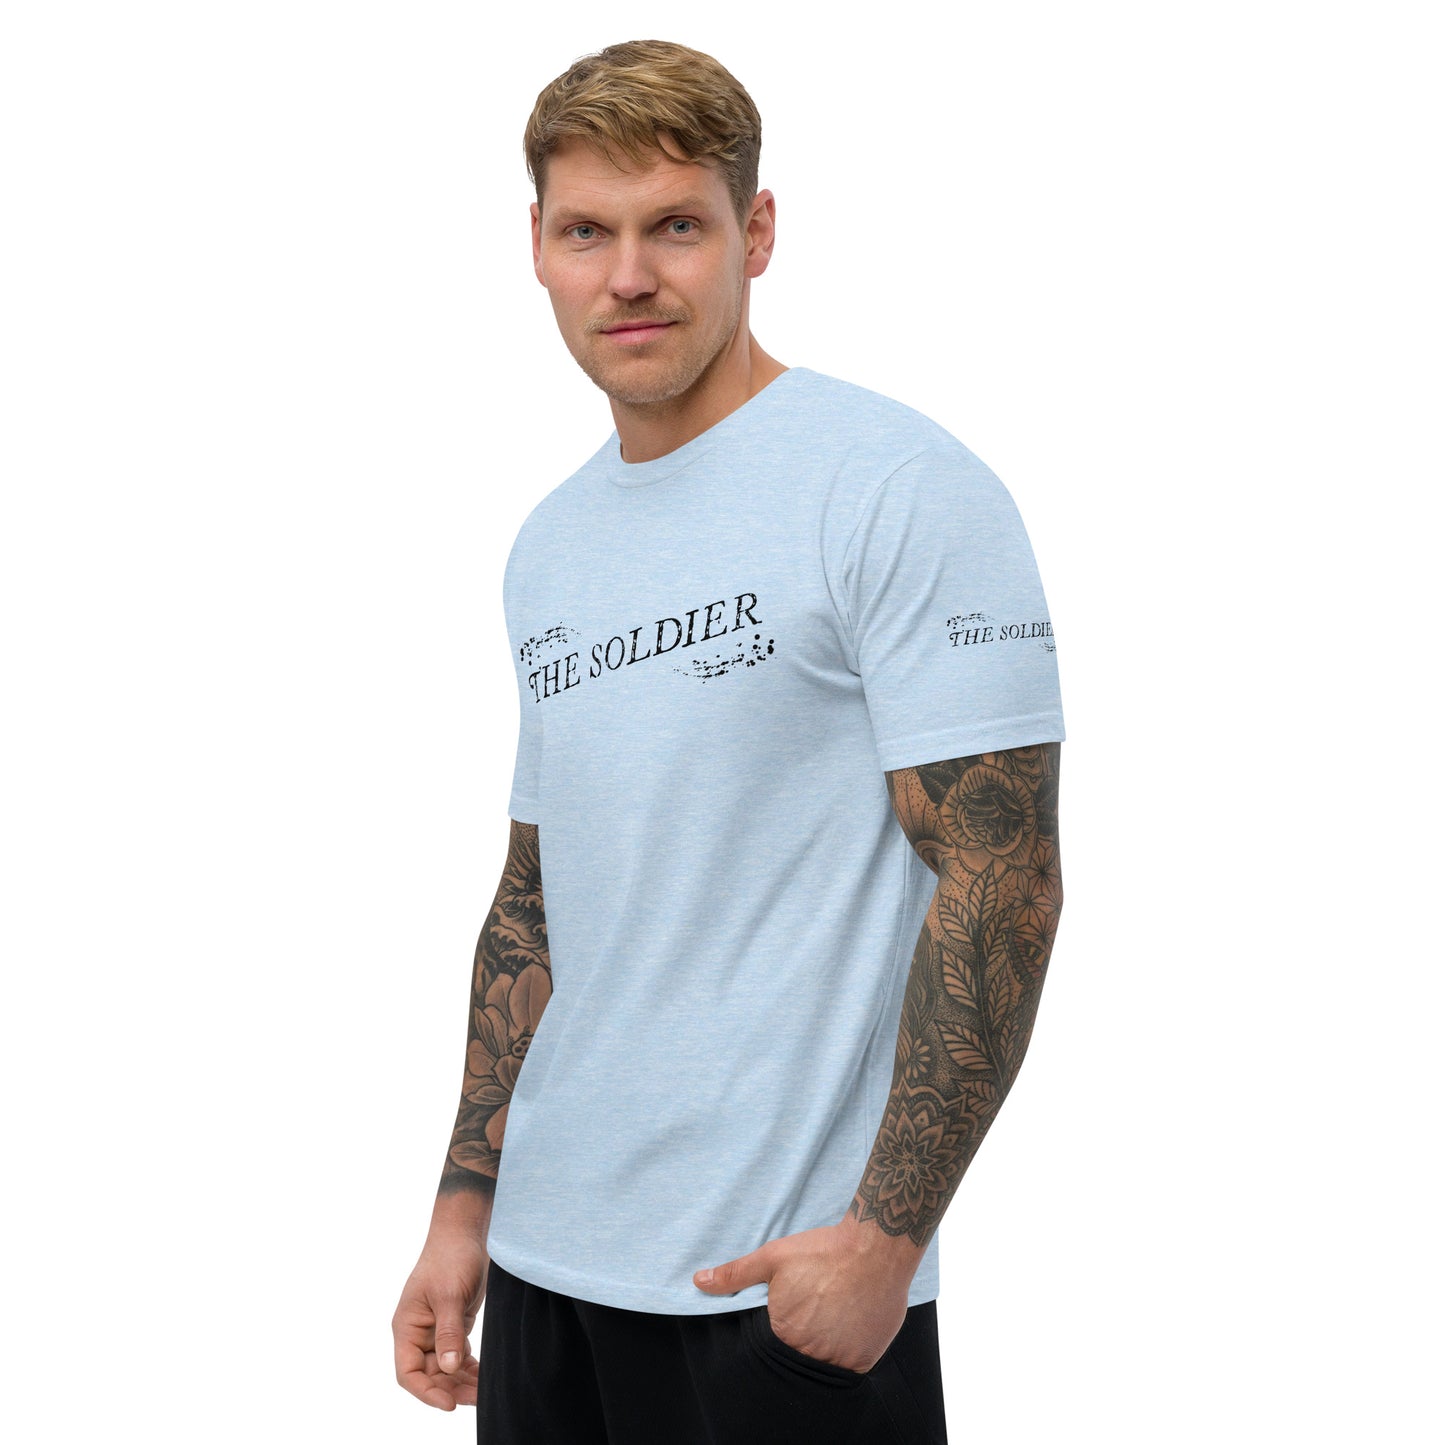 The Soldier 954 Signature Short Sleeve T-shirt